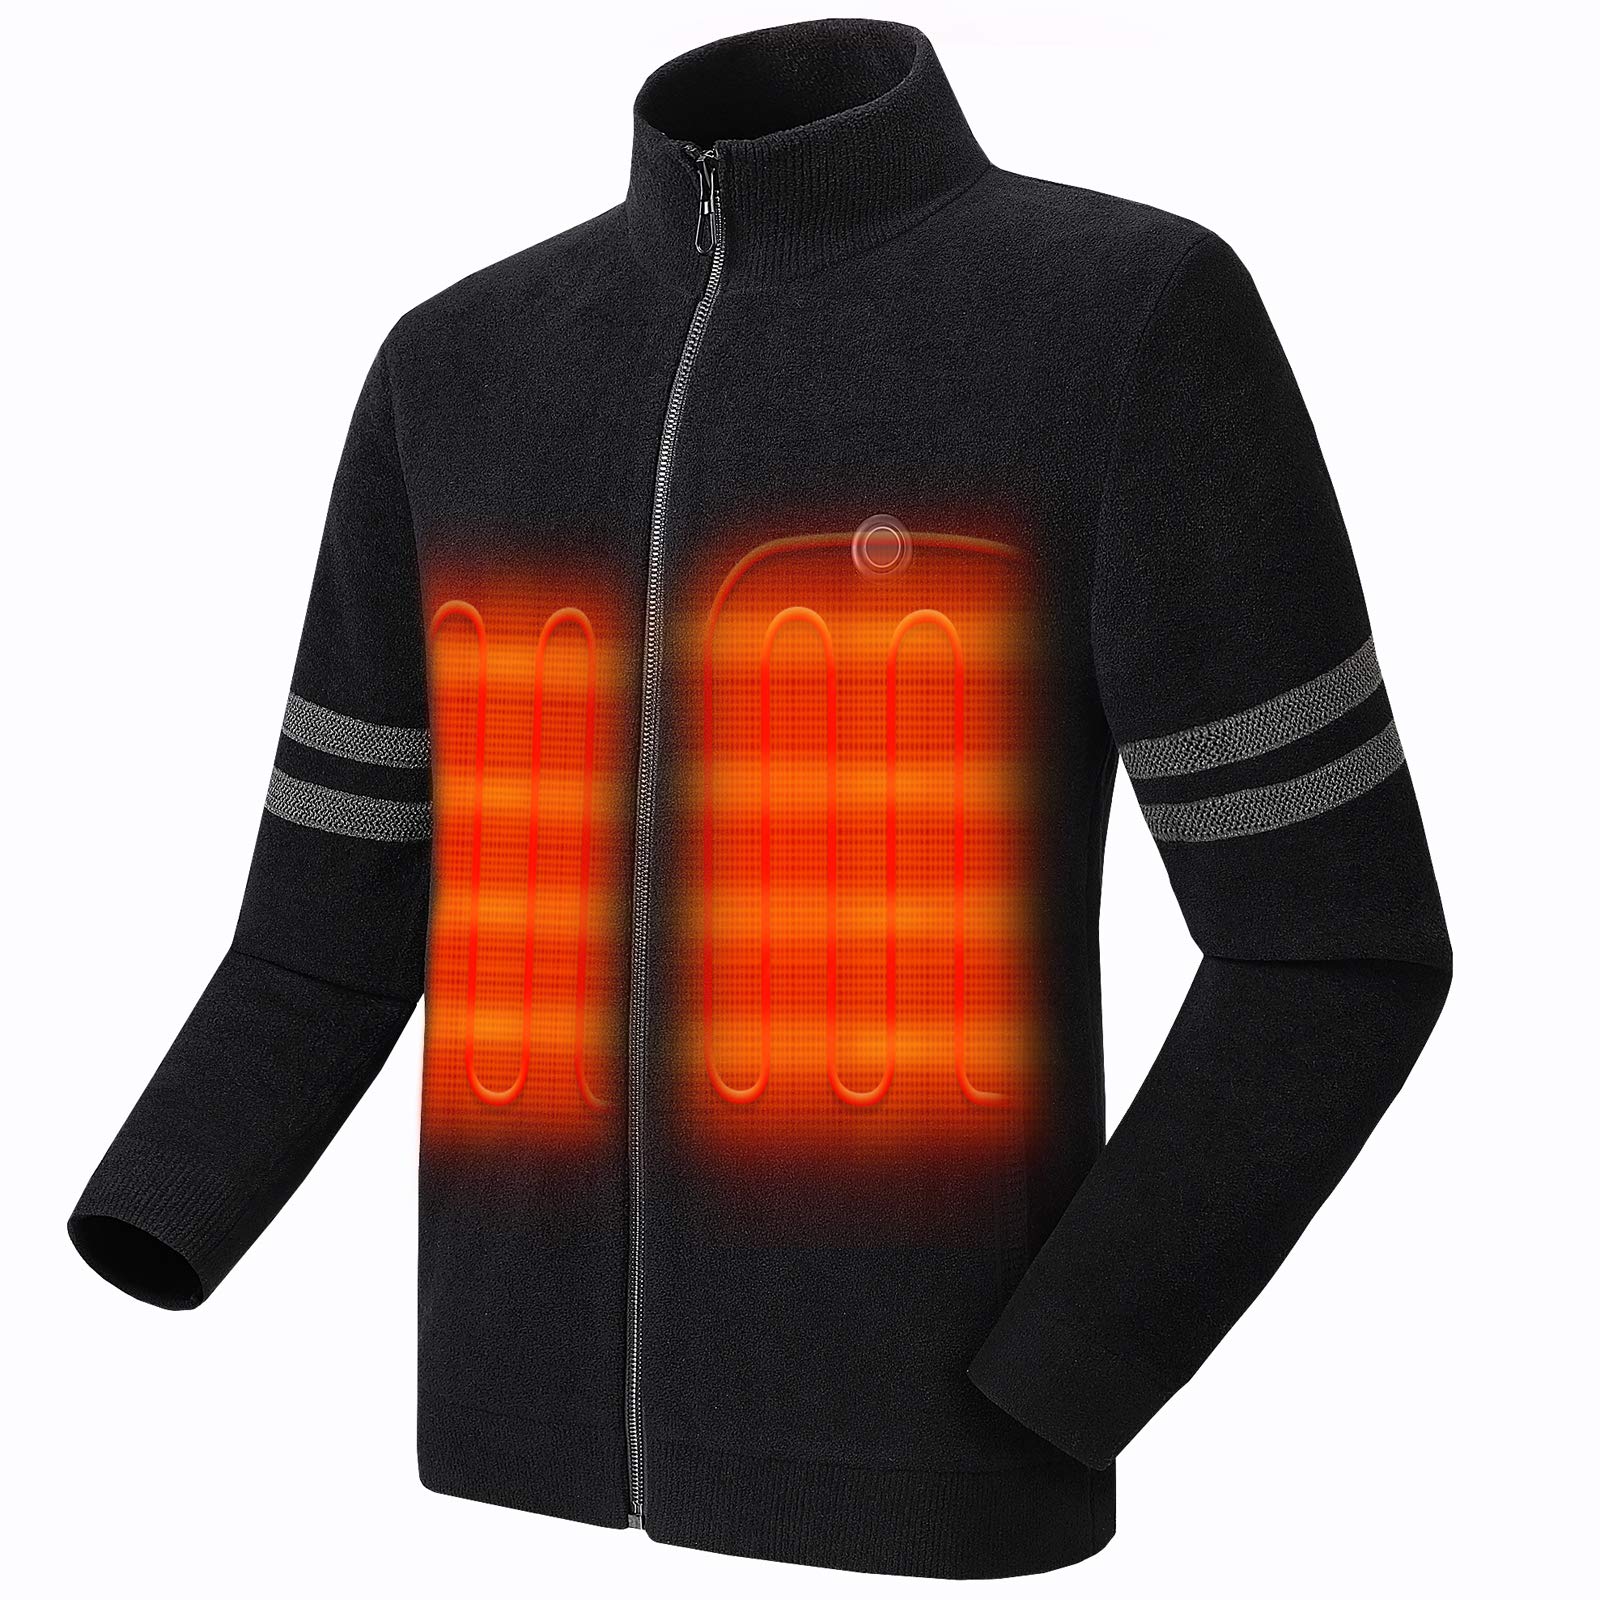 Men's Heated Sweater with Battery Pack 7.4V